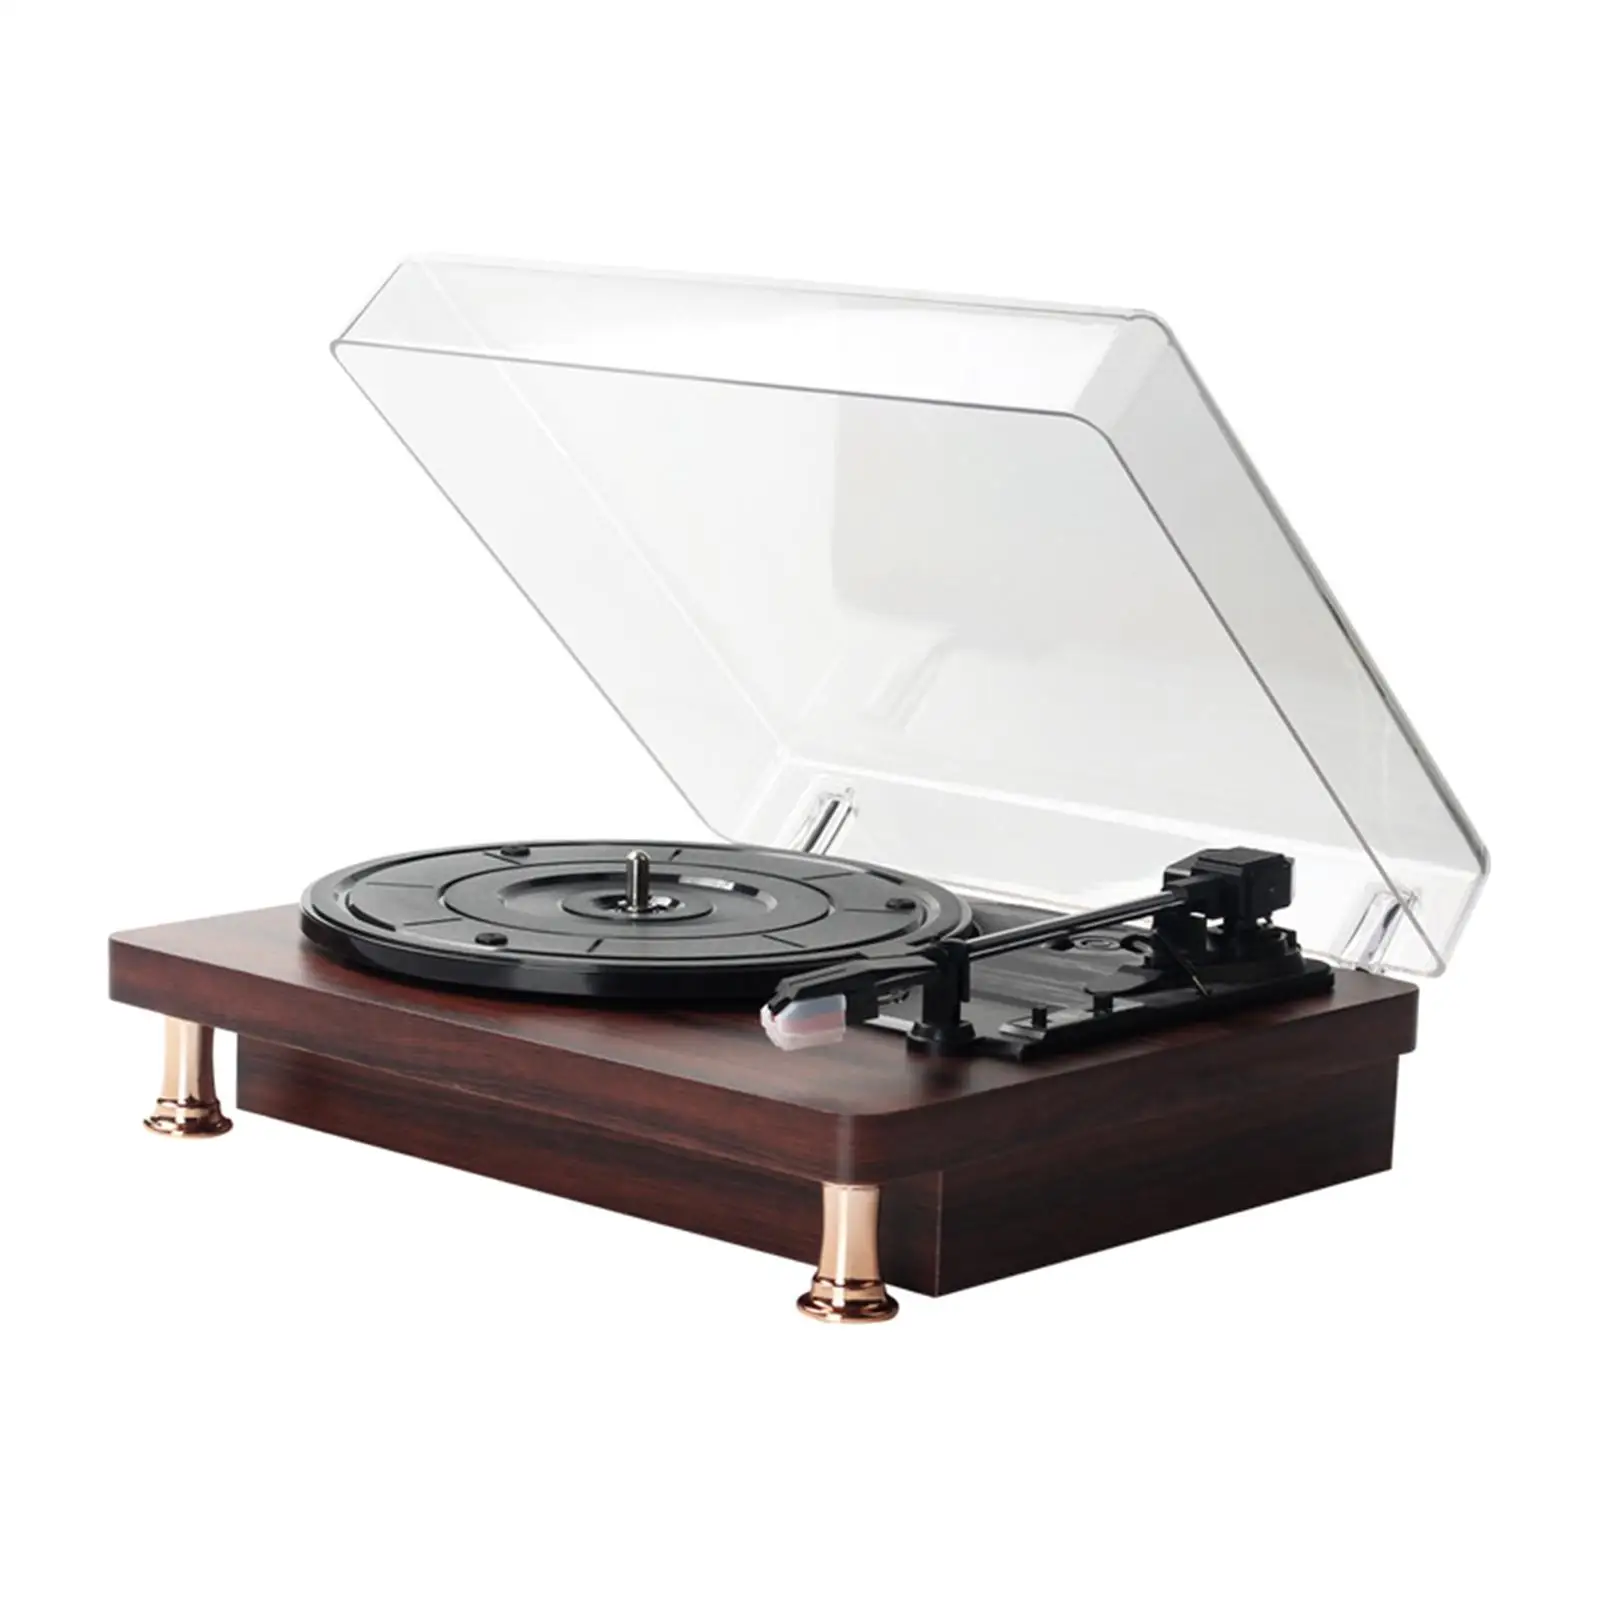 Vinyl Record Player Turntable Music Player Portable Turntable Player 33/45/78 RPM Built in Speakers for Club Home Bar Decoration